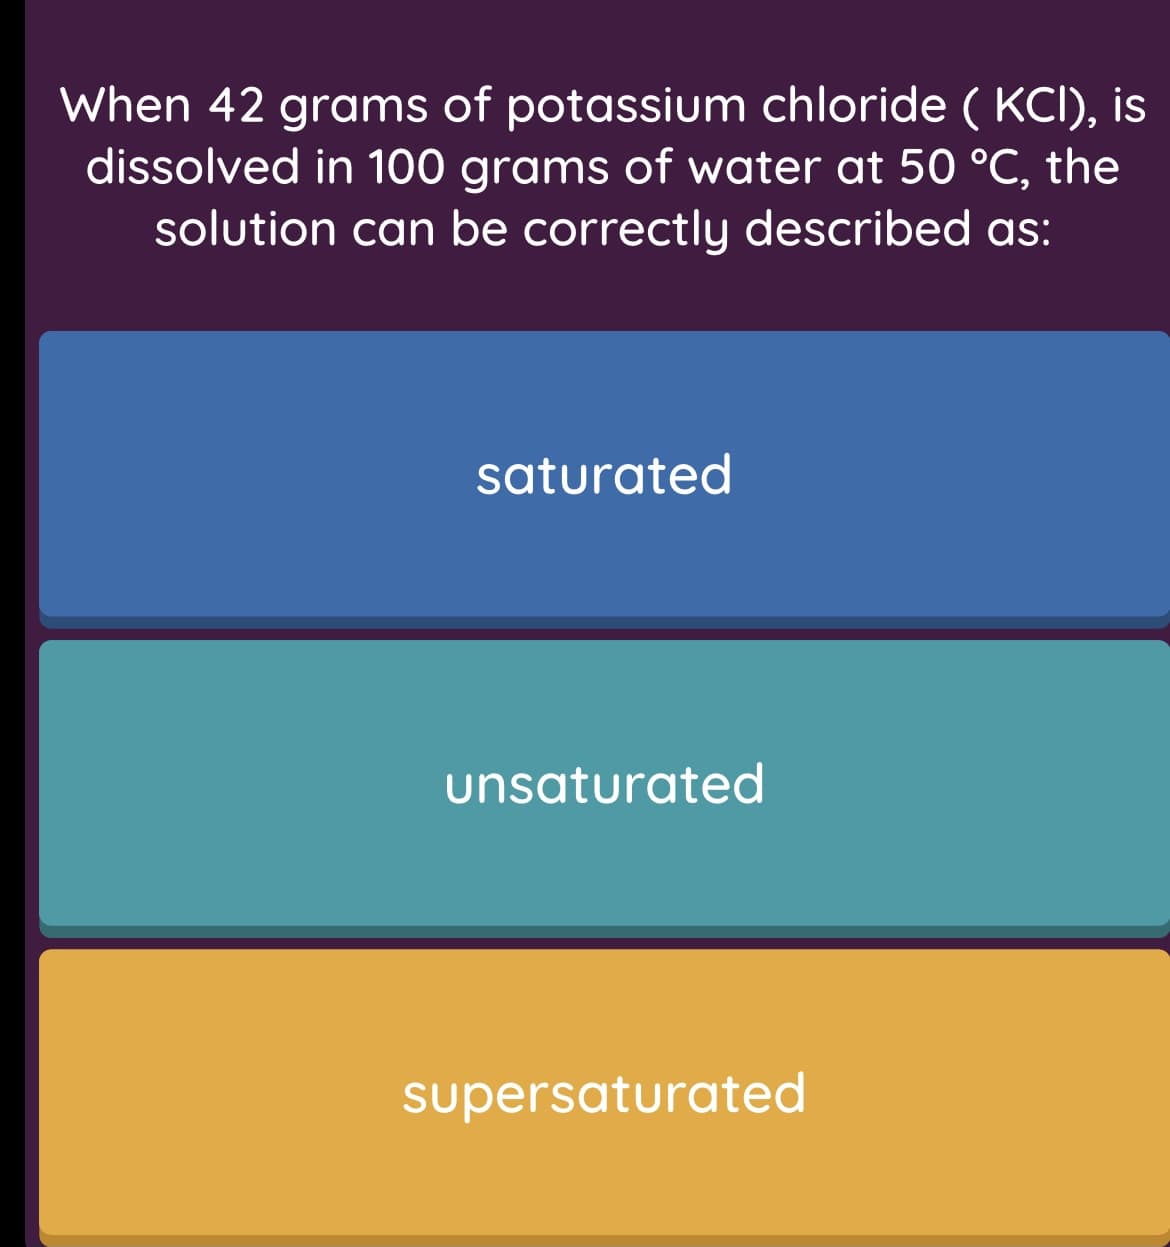 When 42 grams of potassium chloride ( KCI), is
dissolved in 100 grams of water at 50 °C, the
solution can be correctly described as:
saturated
unsaturated
supersaturated
